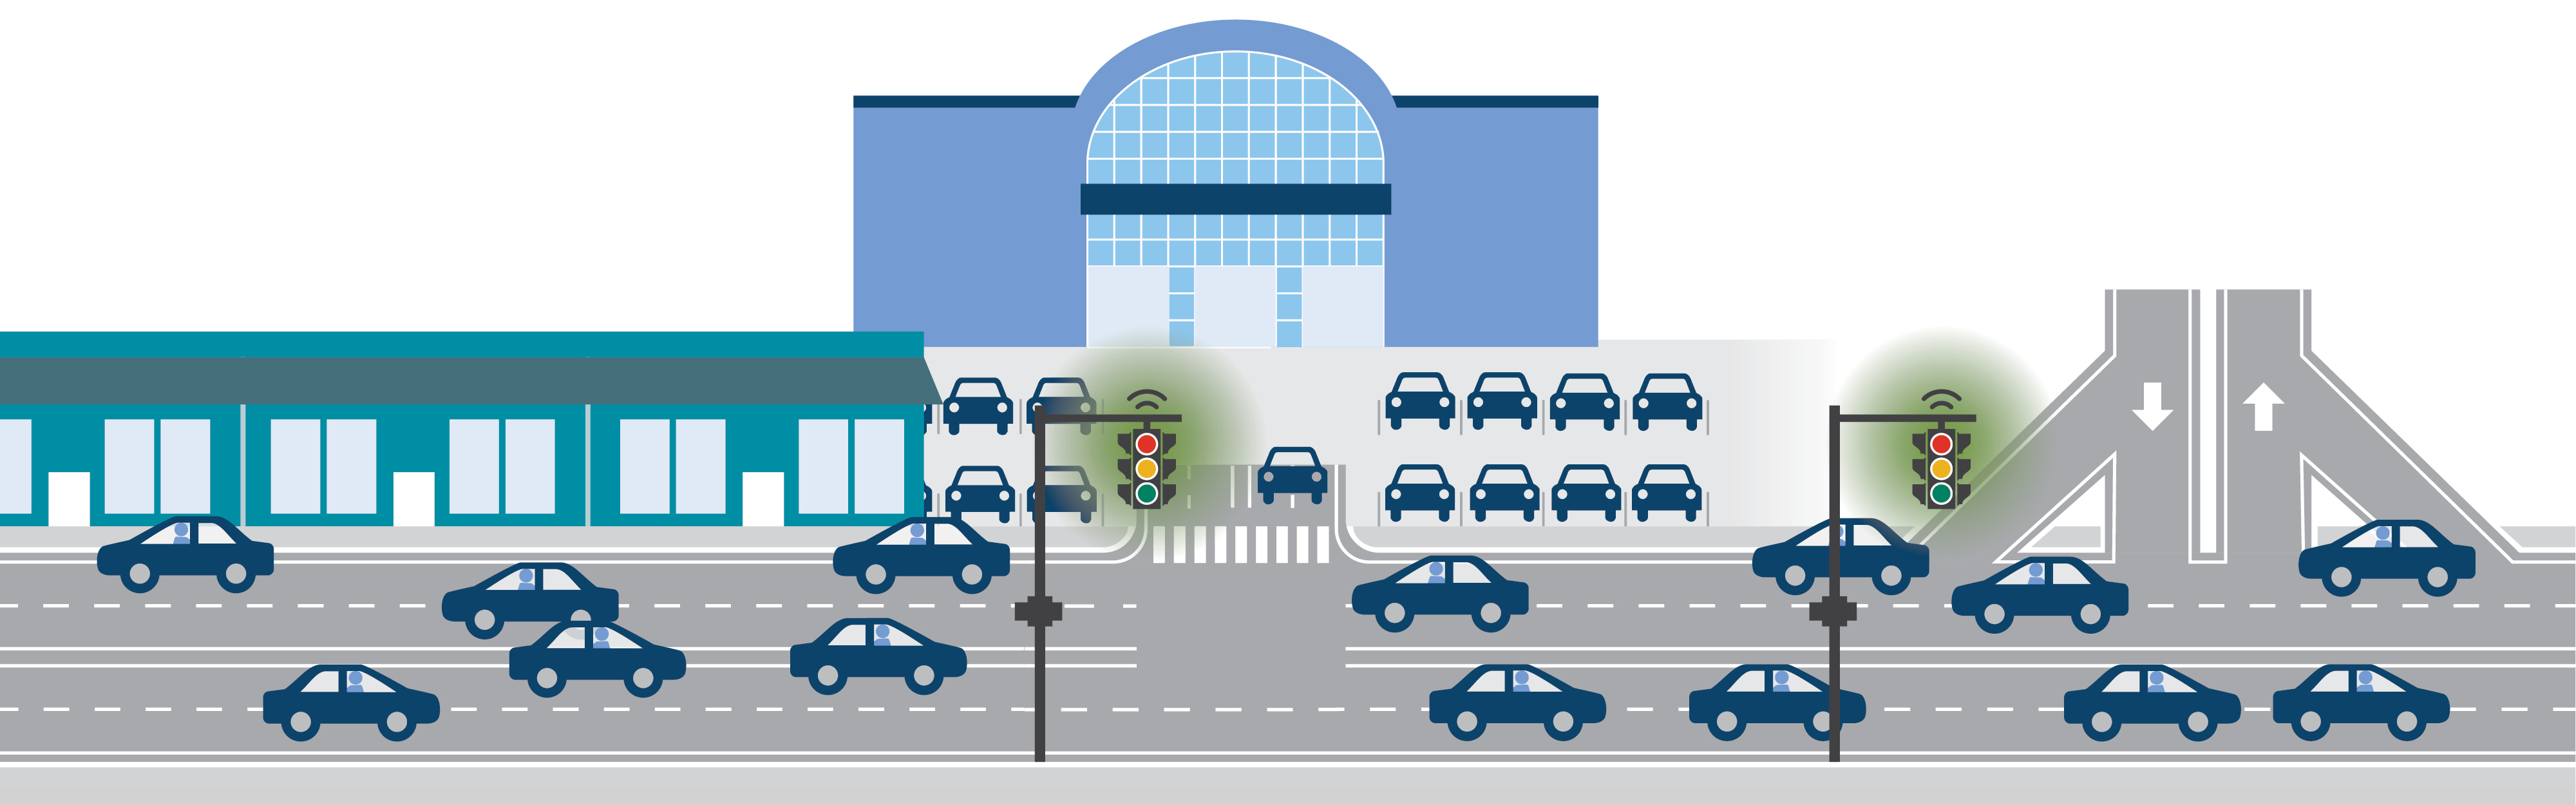 Graphic depicting a busy roadway and working traffic signals.